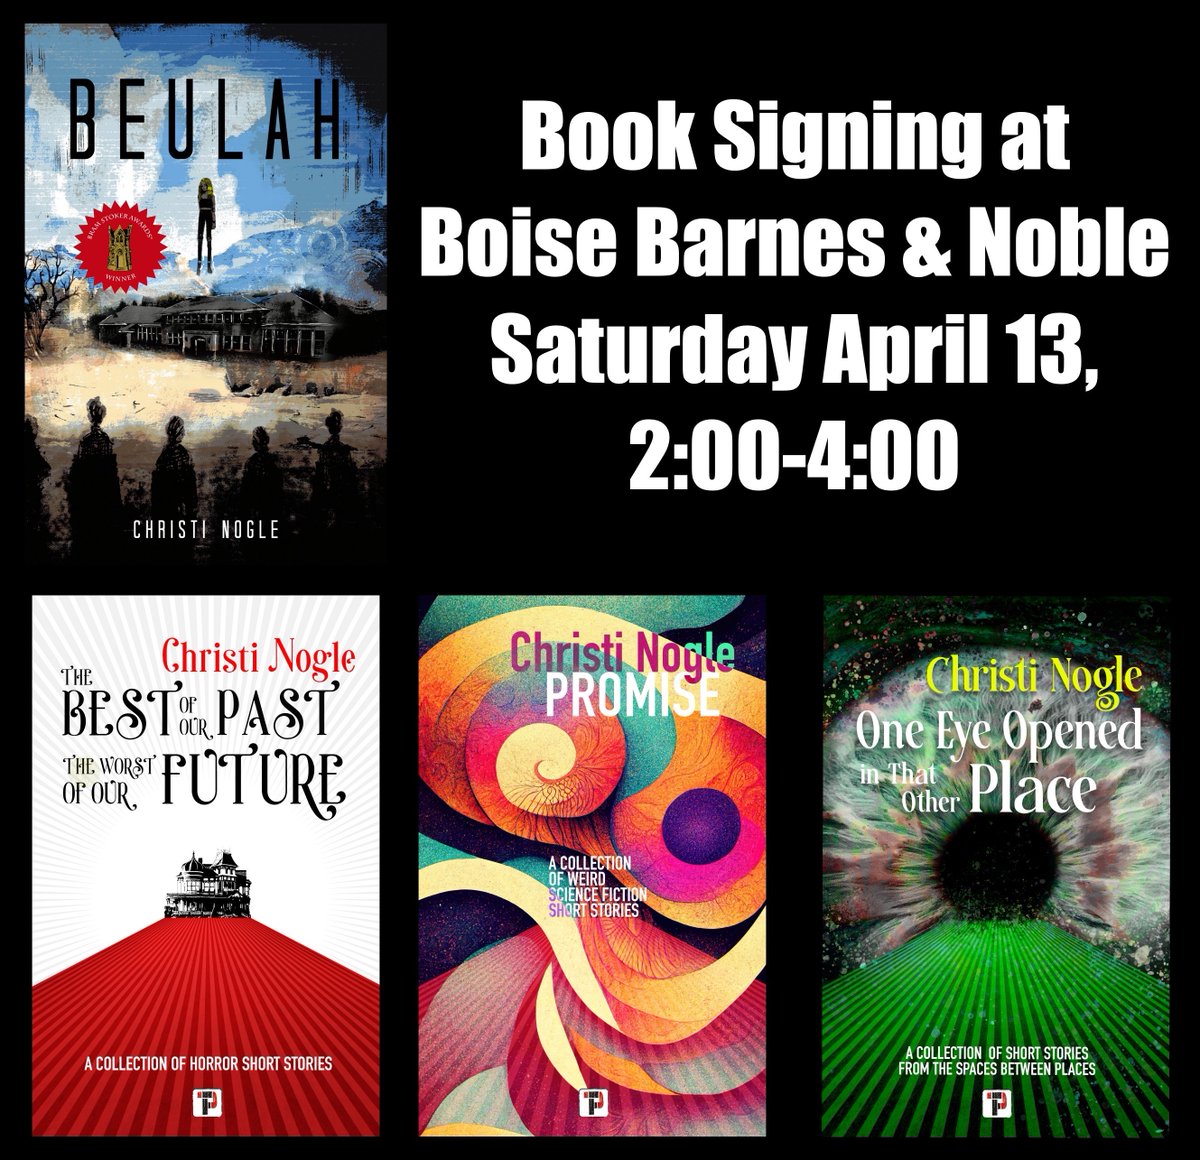 I'll be signing books this Saturday at the Boise Barnes & Noble 2:00-4:00. If anyone is around, I would love it if you stopped by!